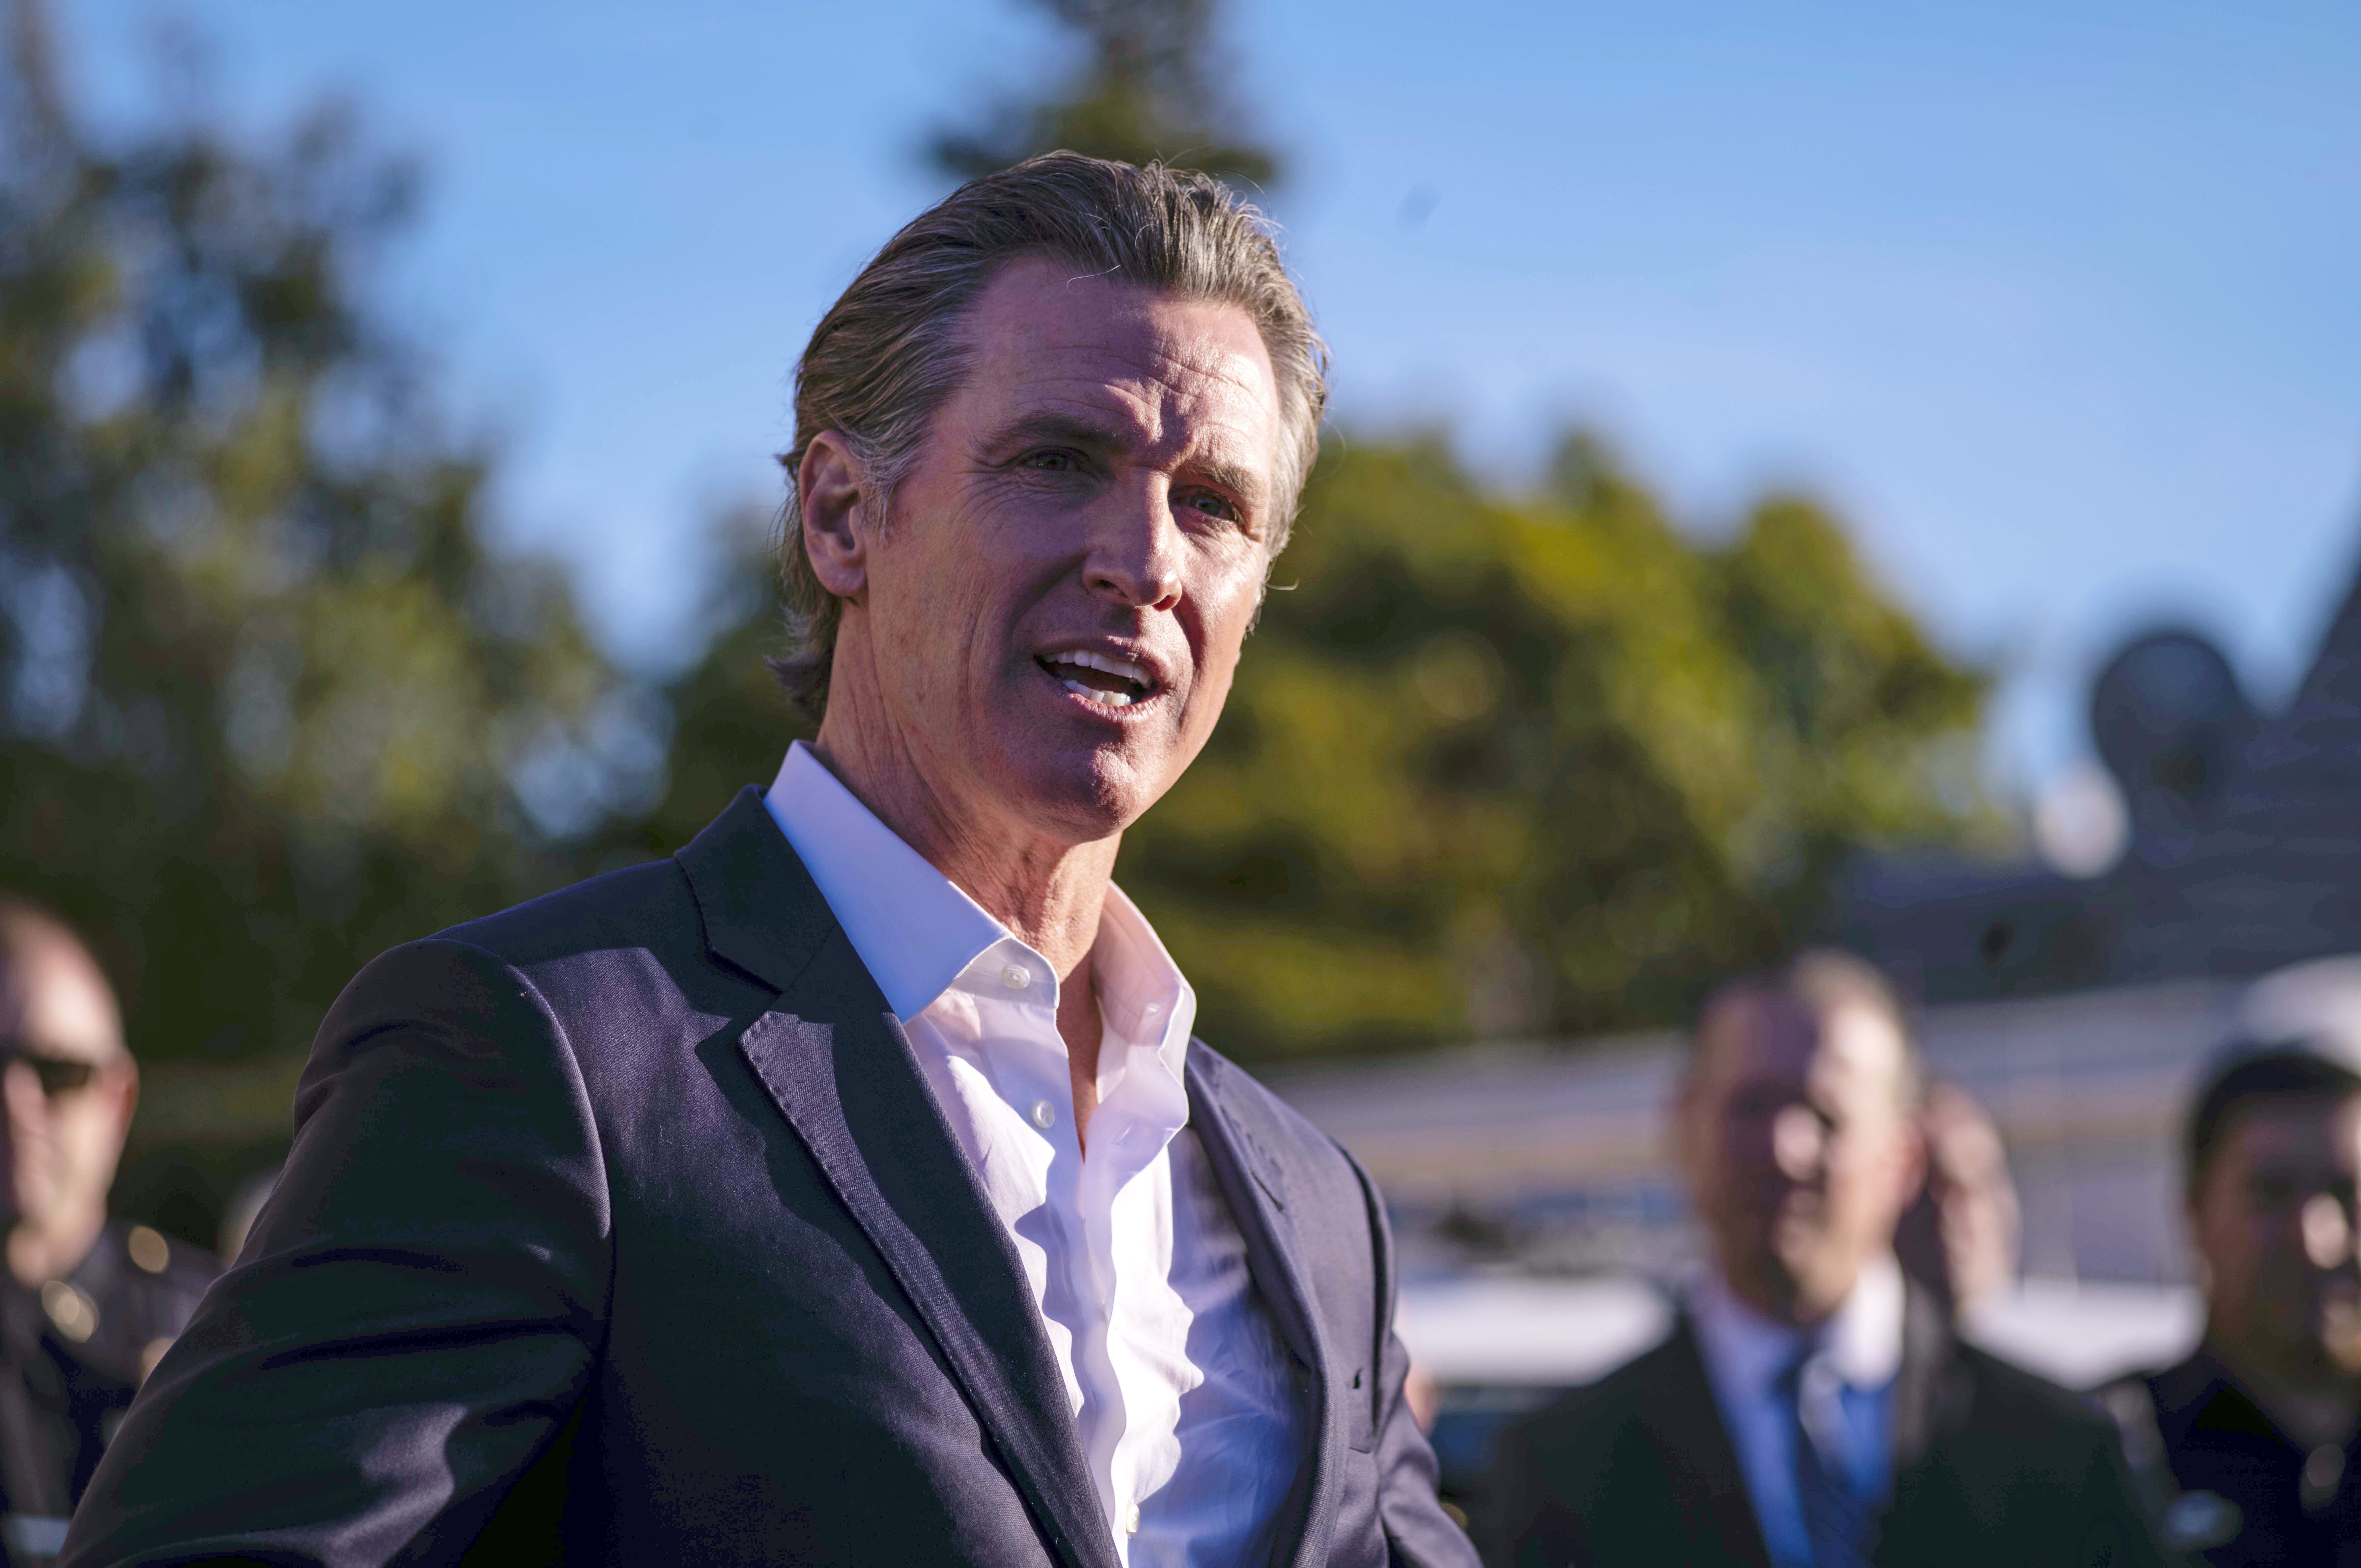 newsom-renews-call-for-federal-action-on-gun-safety-after-2-mass-shootings-in-california